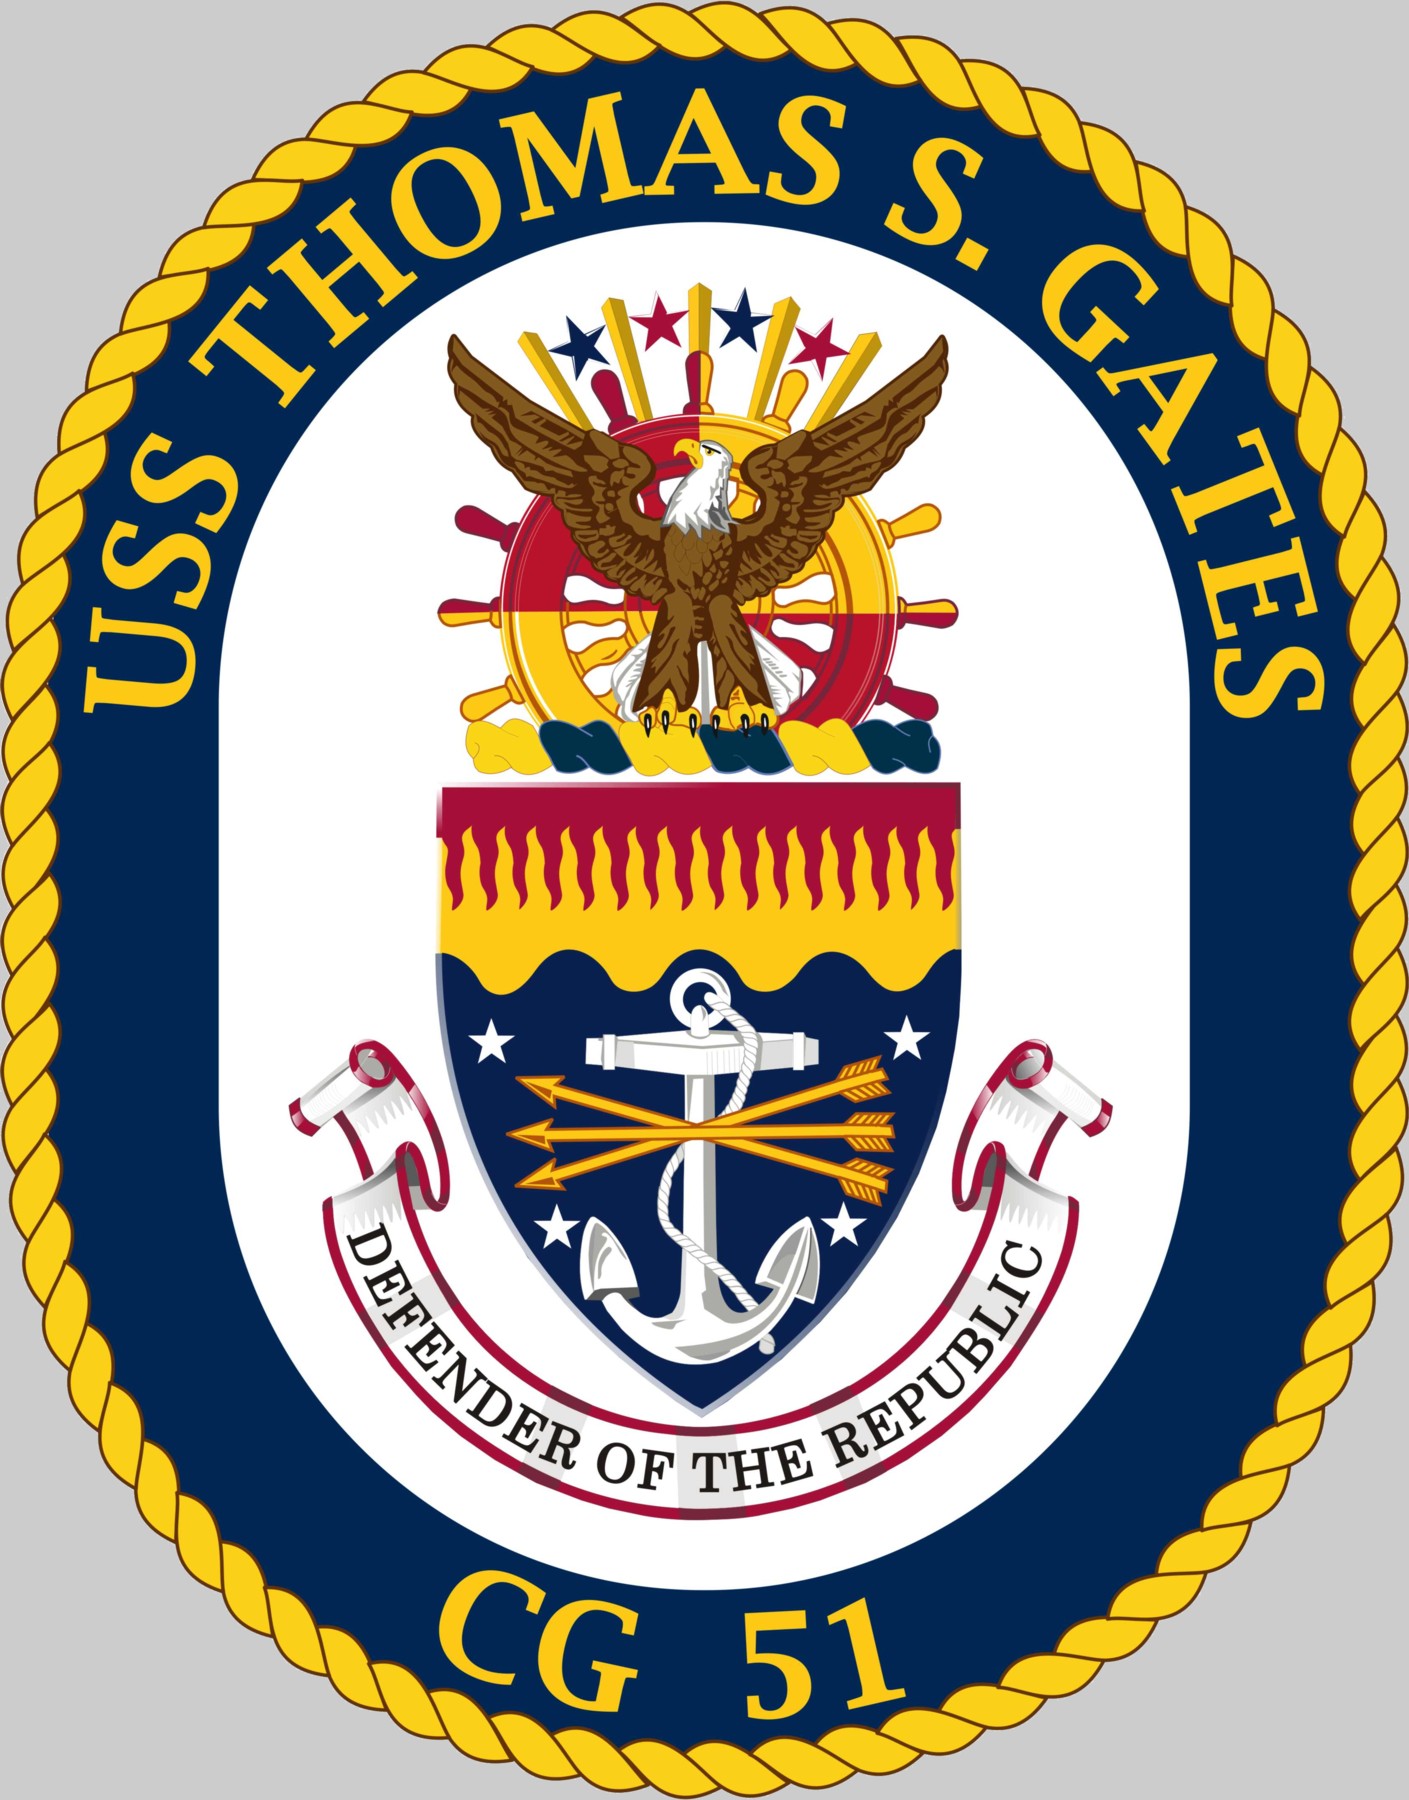 cg-51 uss thomas s. gates insignia crest patch badge ticonderoga class guided missile cruiser us navy 02x